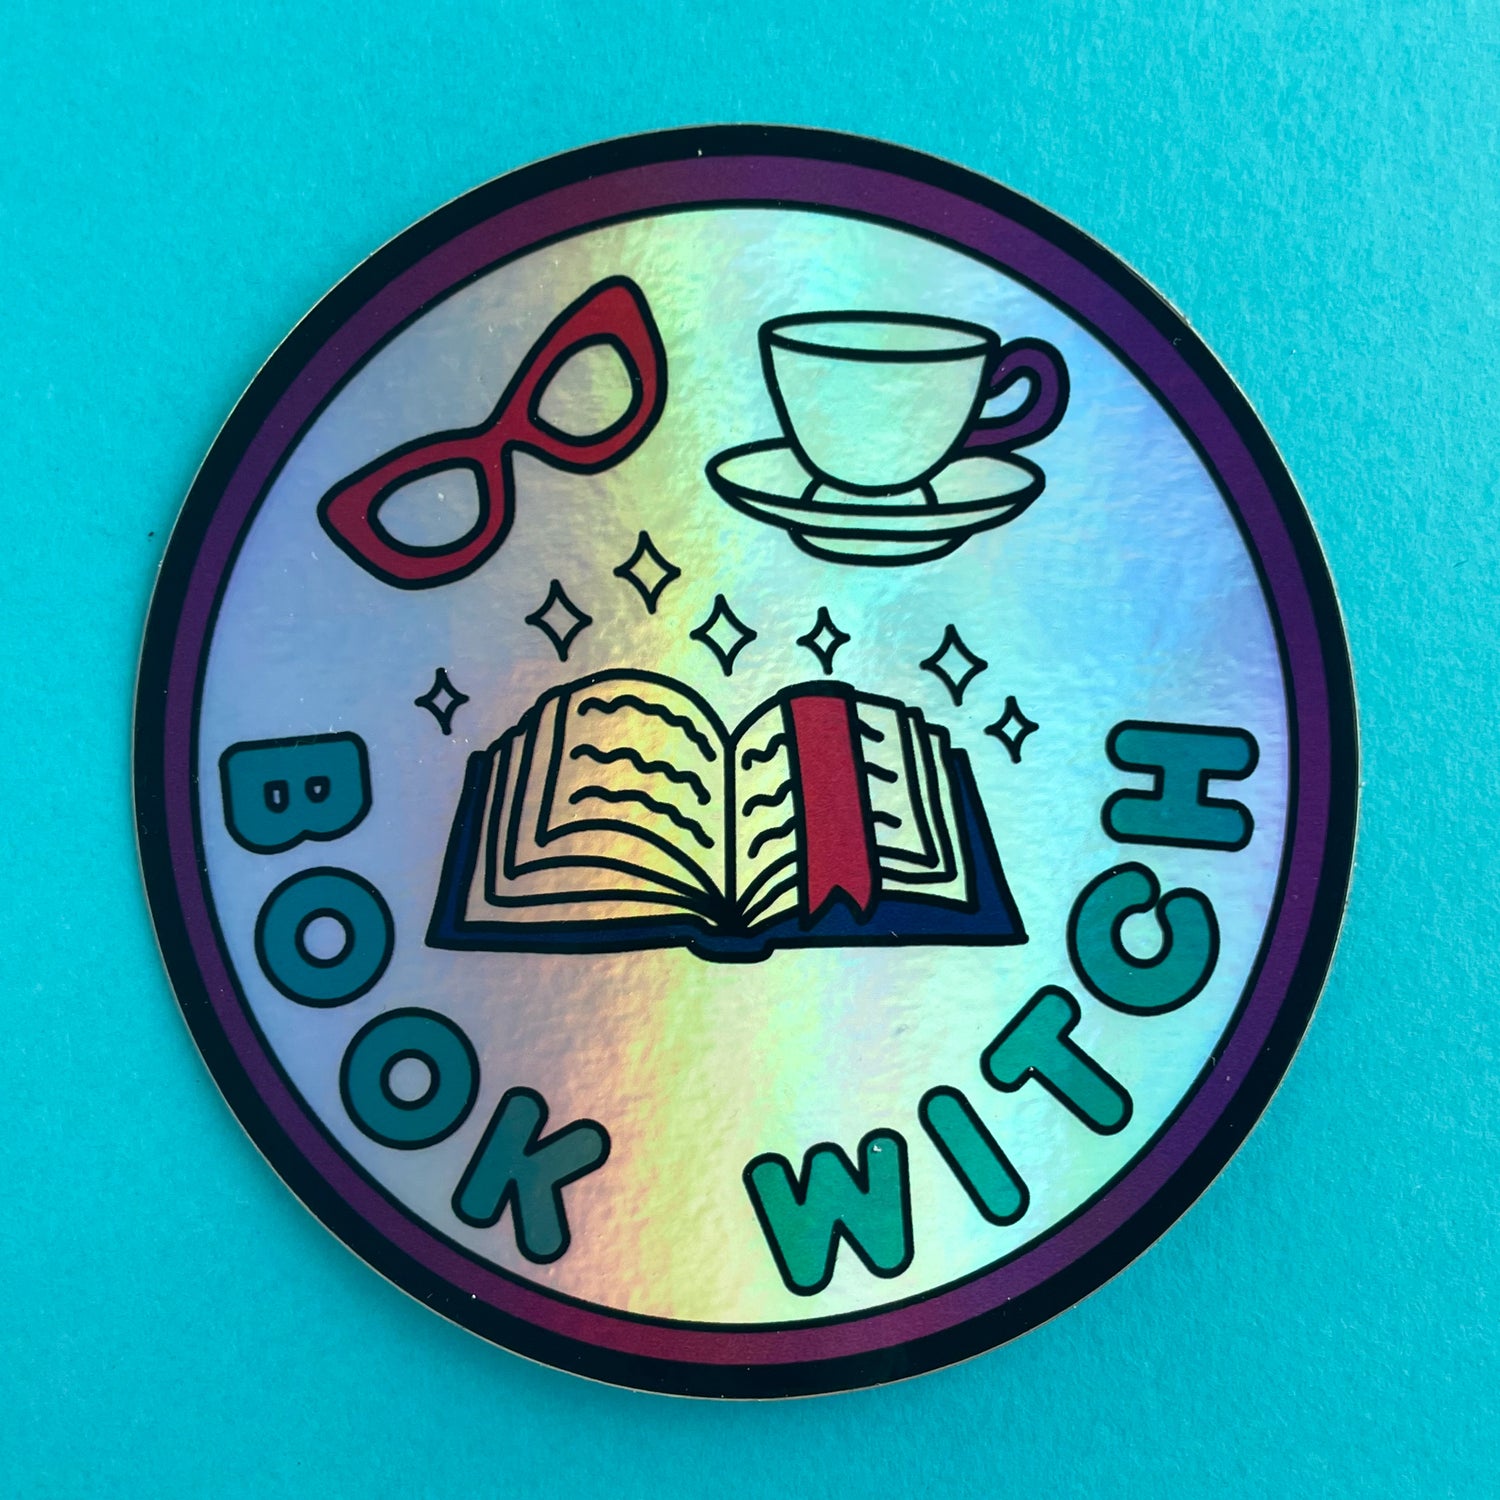 A circular holographic sticker. It has a maroon border with turquoise text that reads "Book Witch". There is an open book, sparkles, red glasses and a teacup above the words.